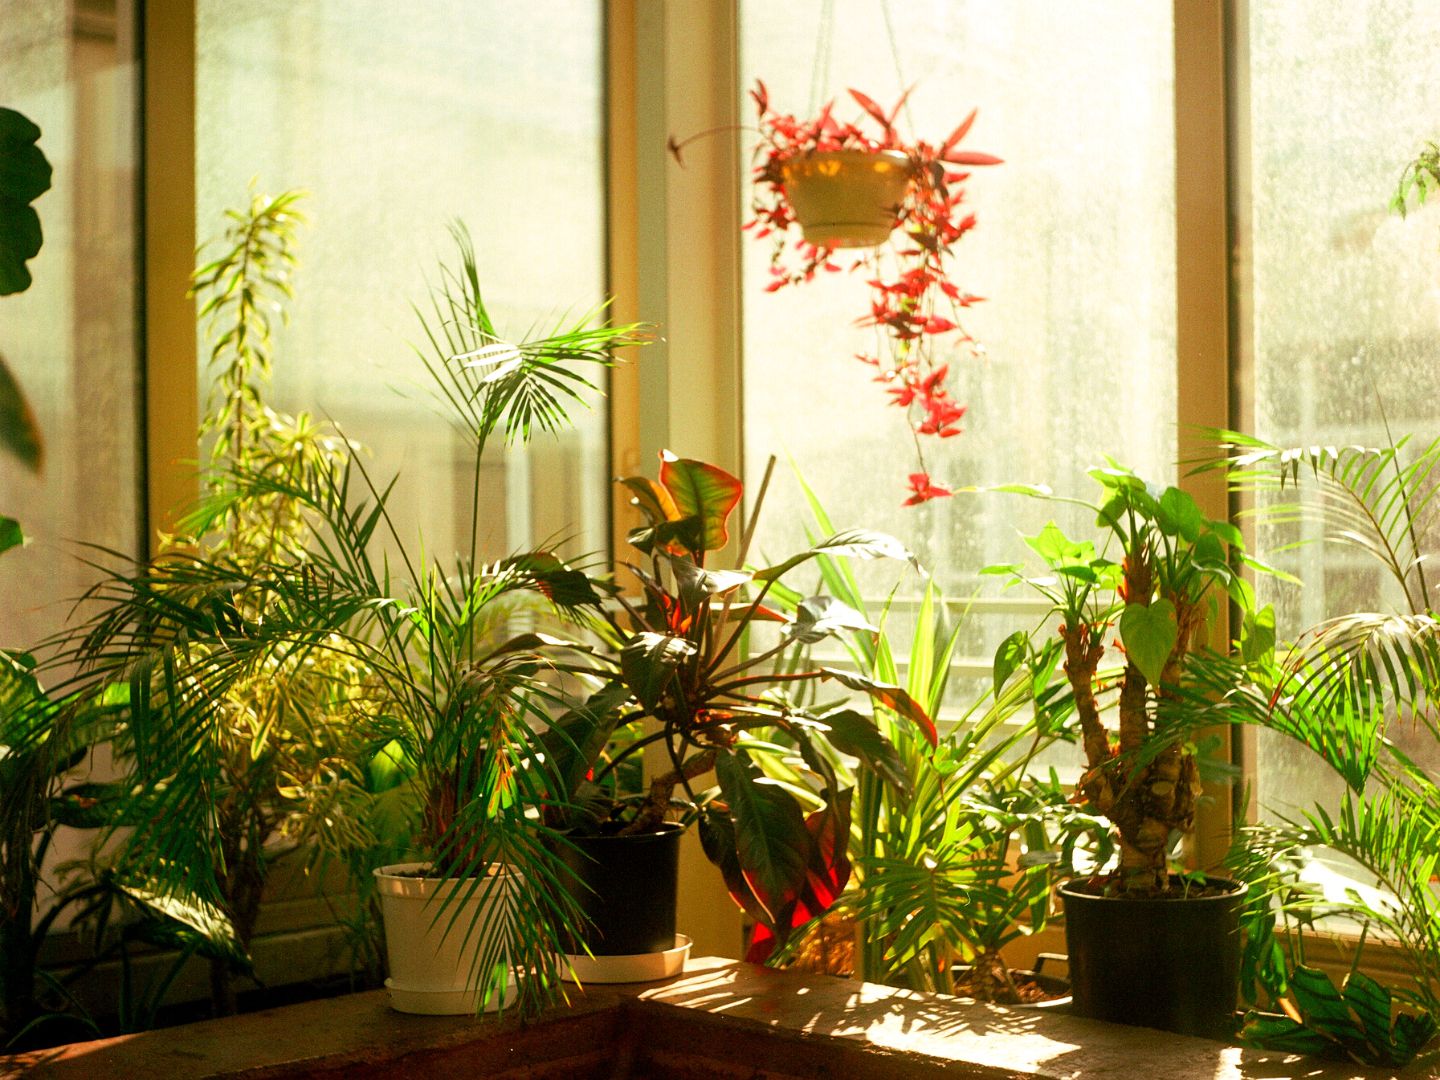 Choosing the best light for your plants